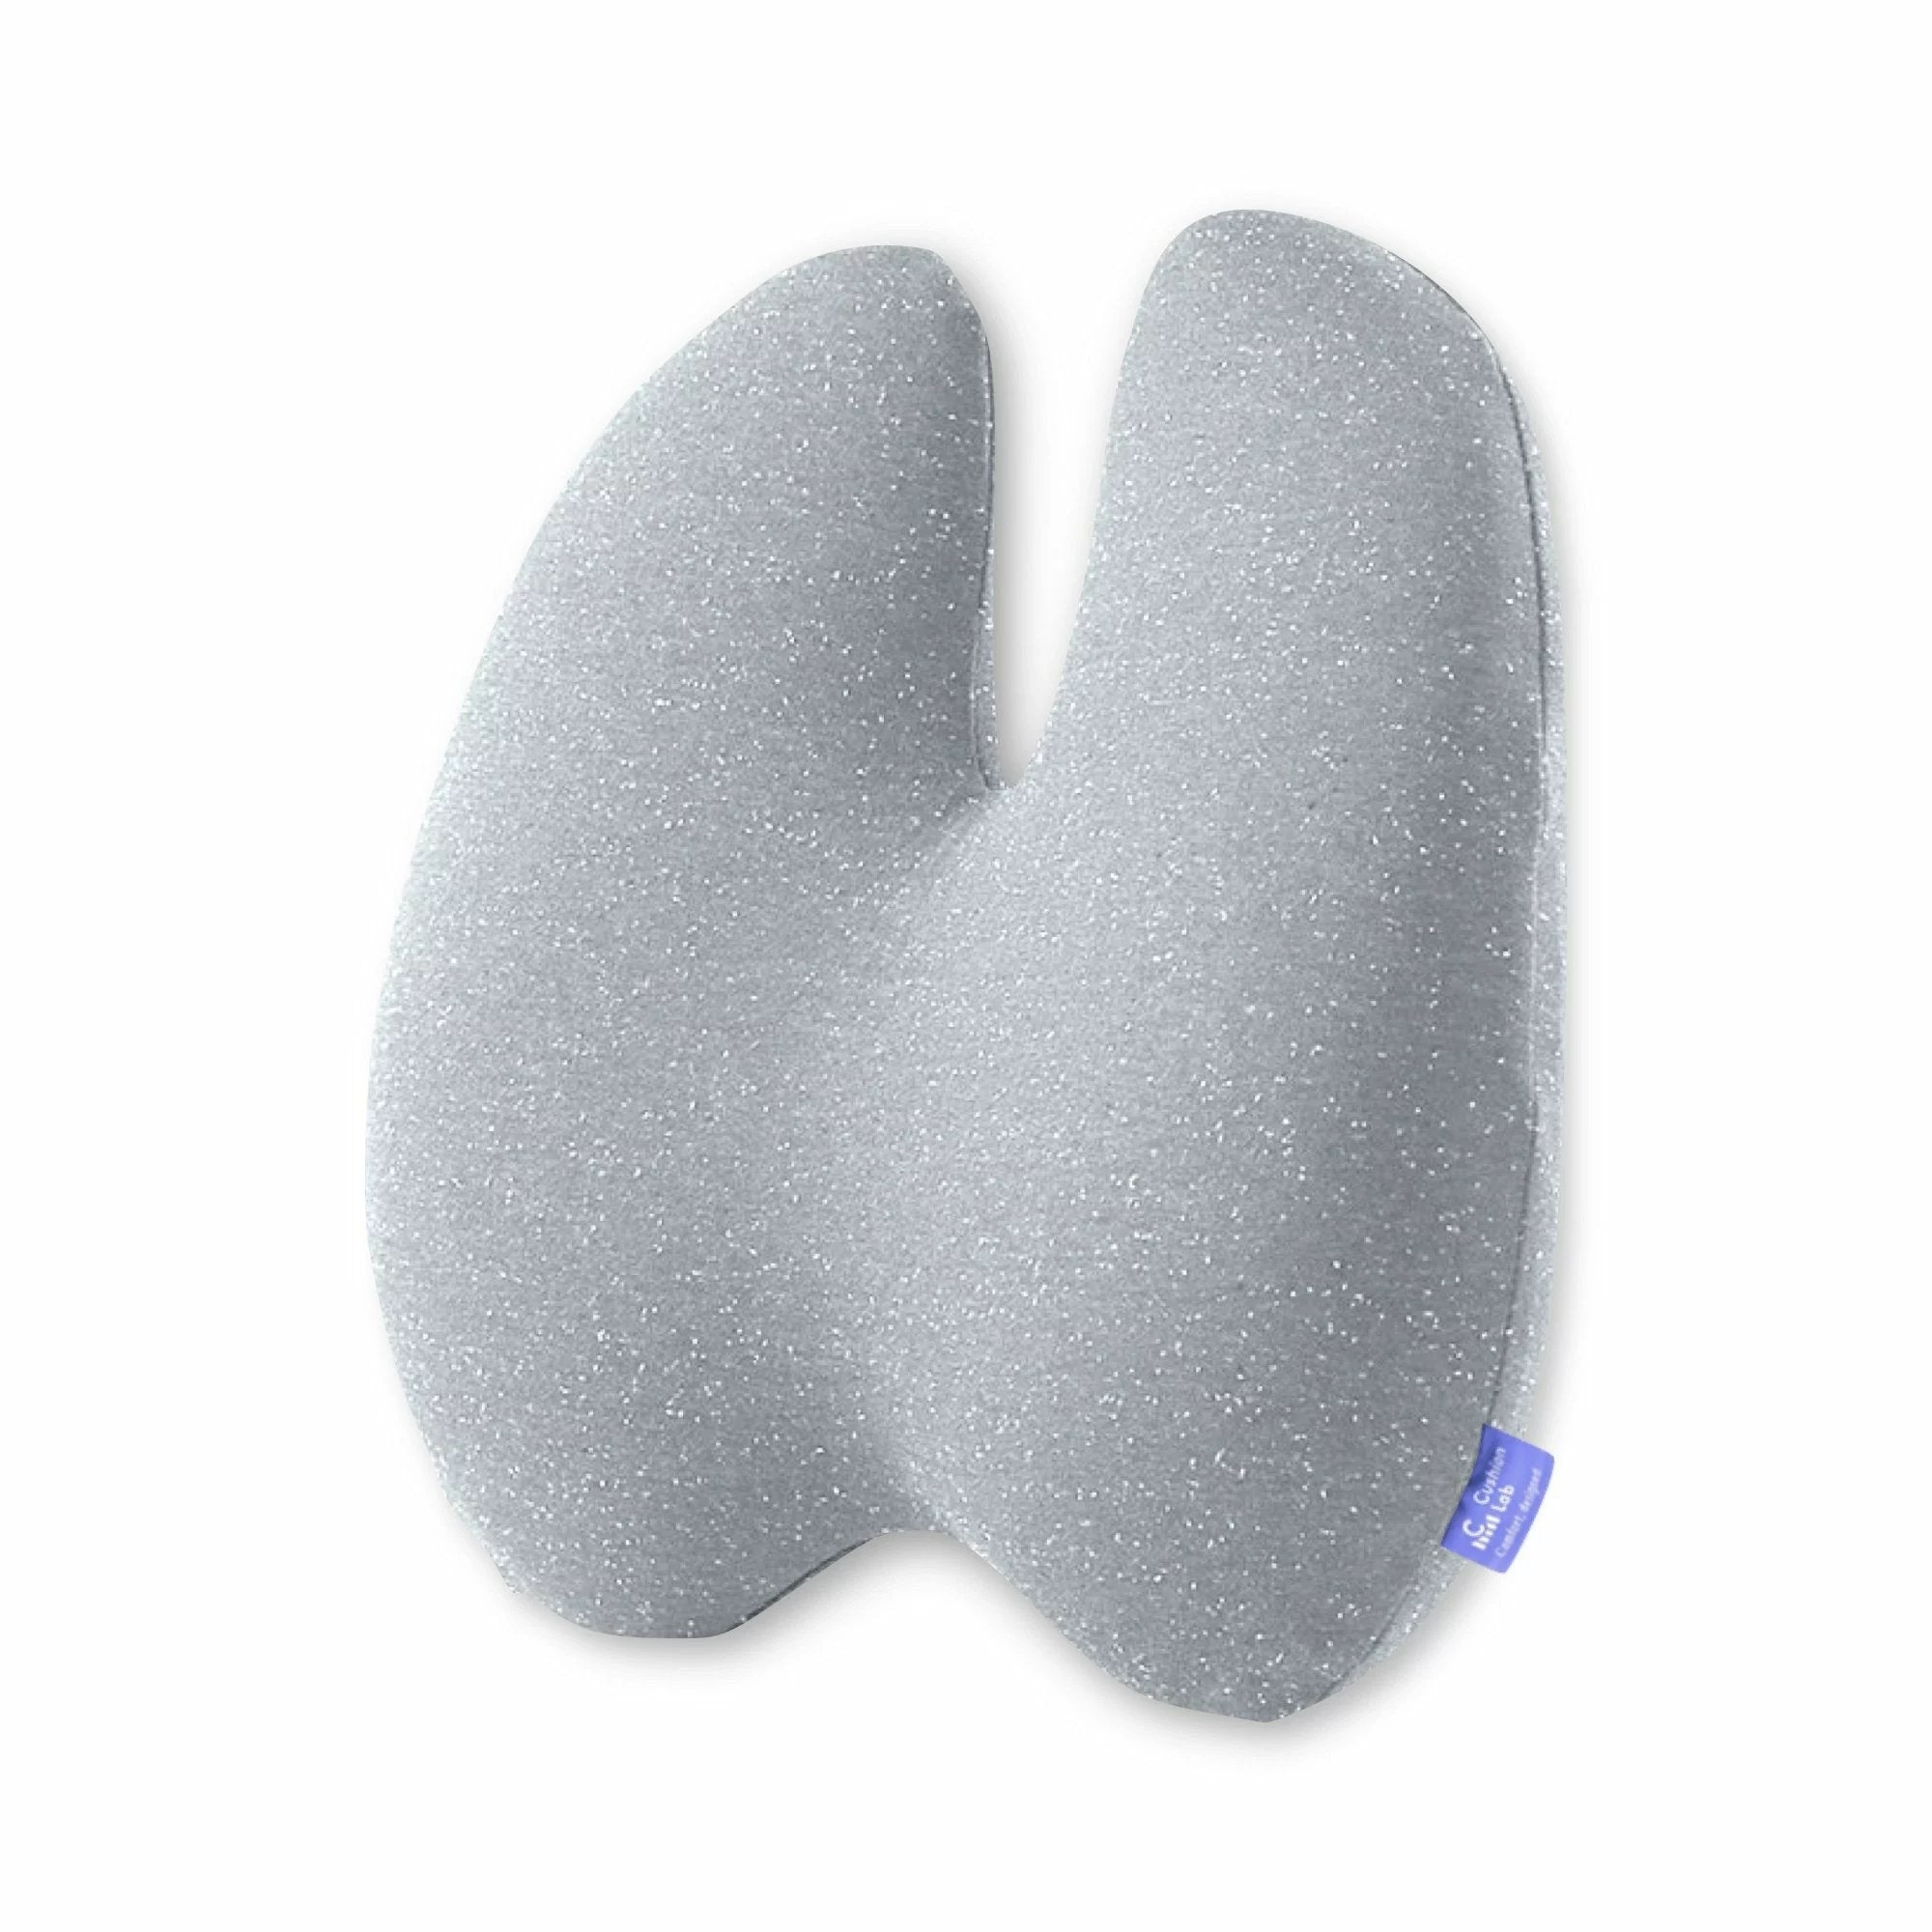 Alibo Neck Pillow Review - A Better Pillow for Gaming Chairs? 